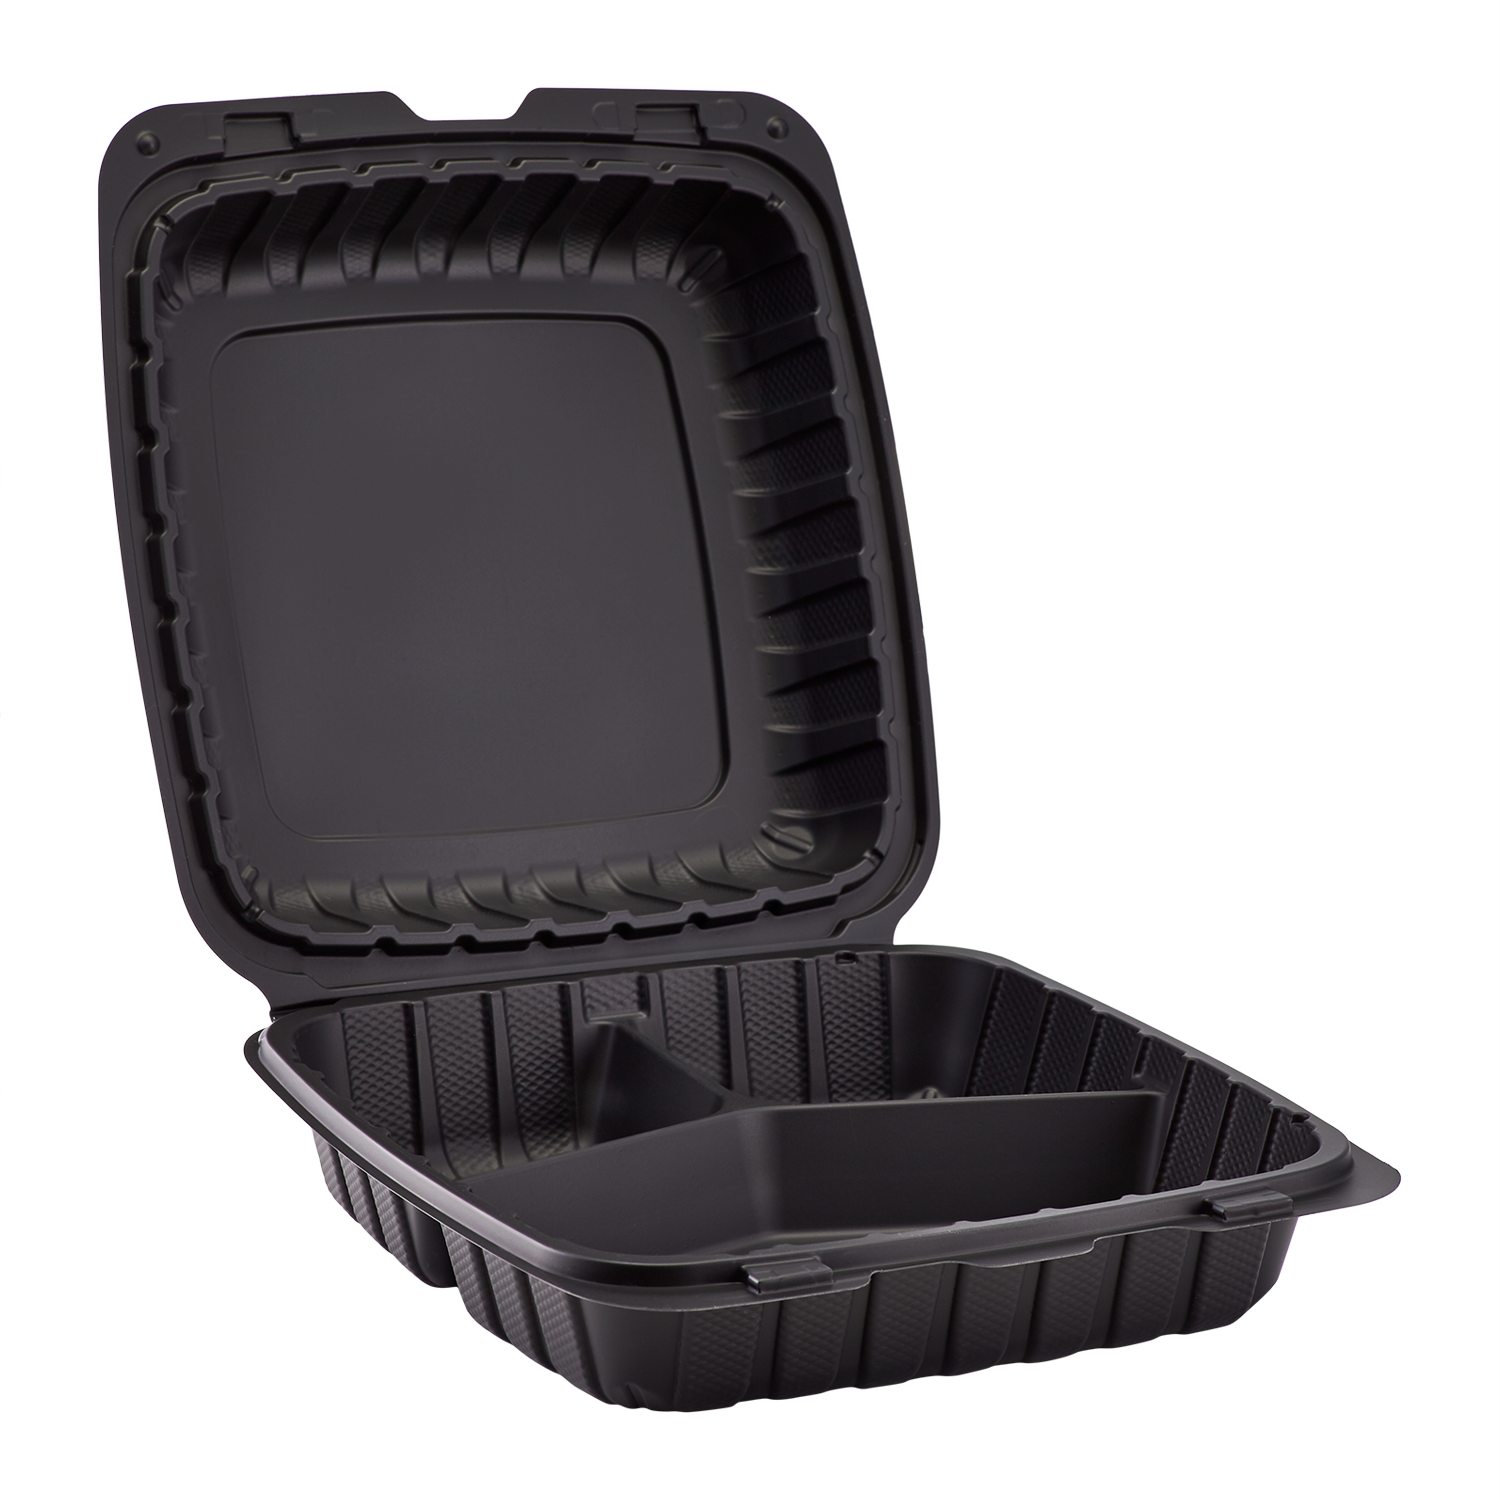 Plastic 3-Compartment Take Out Container 1ct